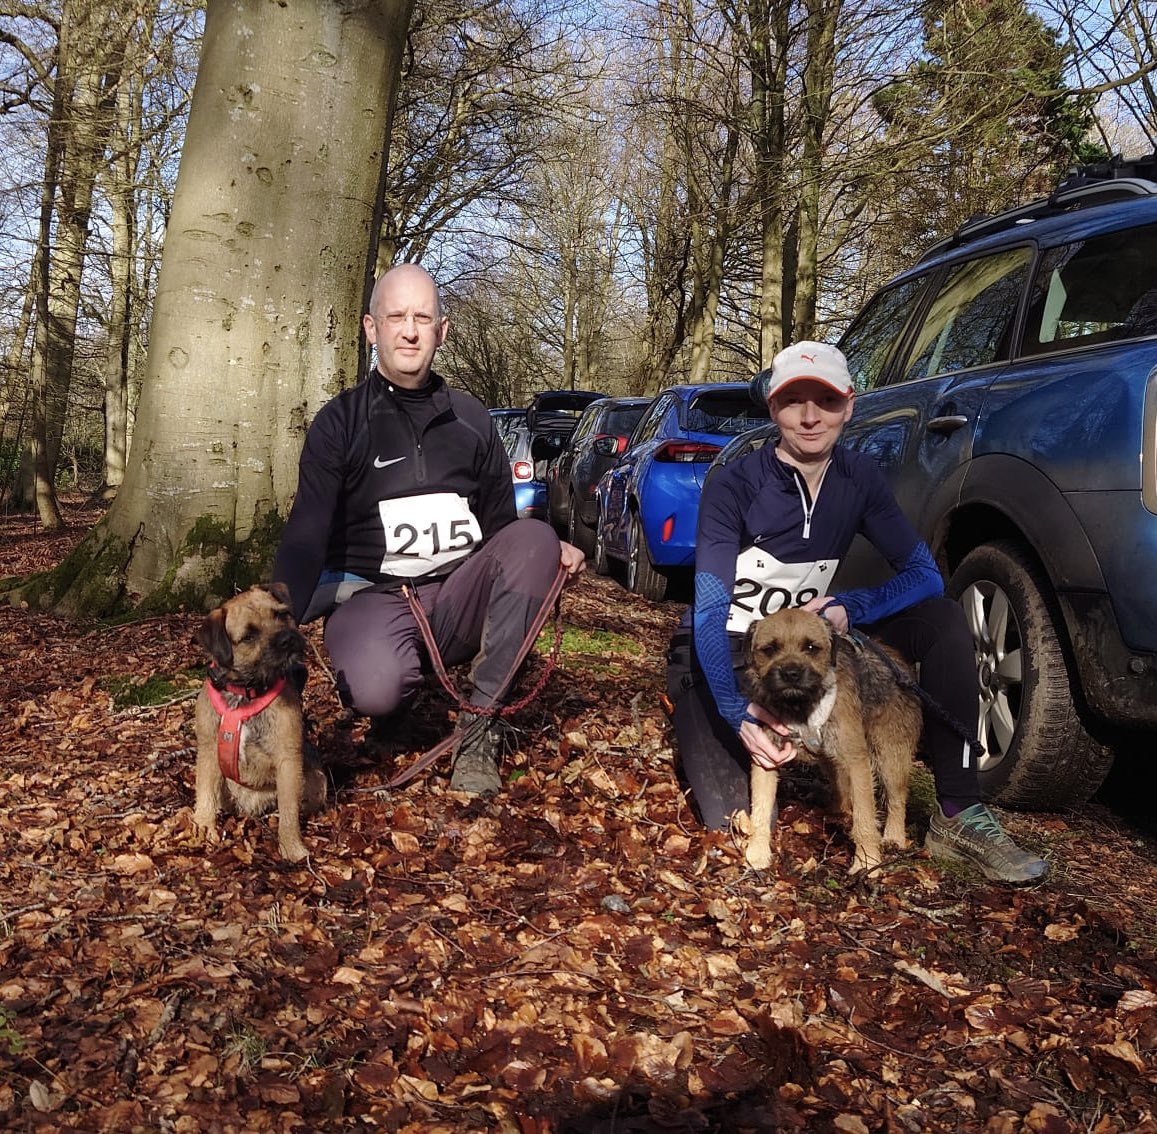 Debut race. We were not the smallest nor the loudest. First #canicross race = success. #BTPosse #TrailRunning #HappyRunner